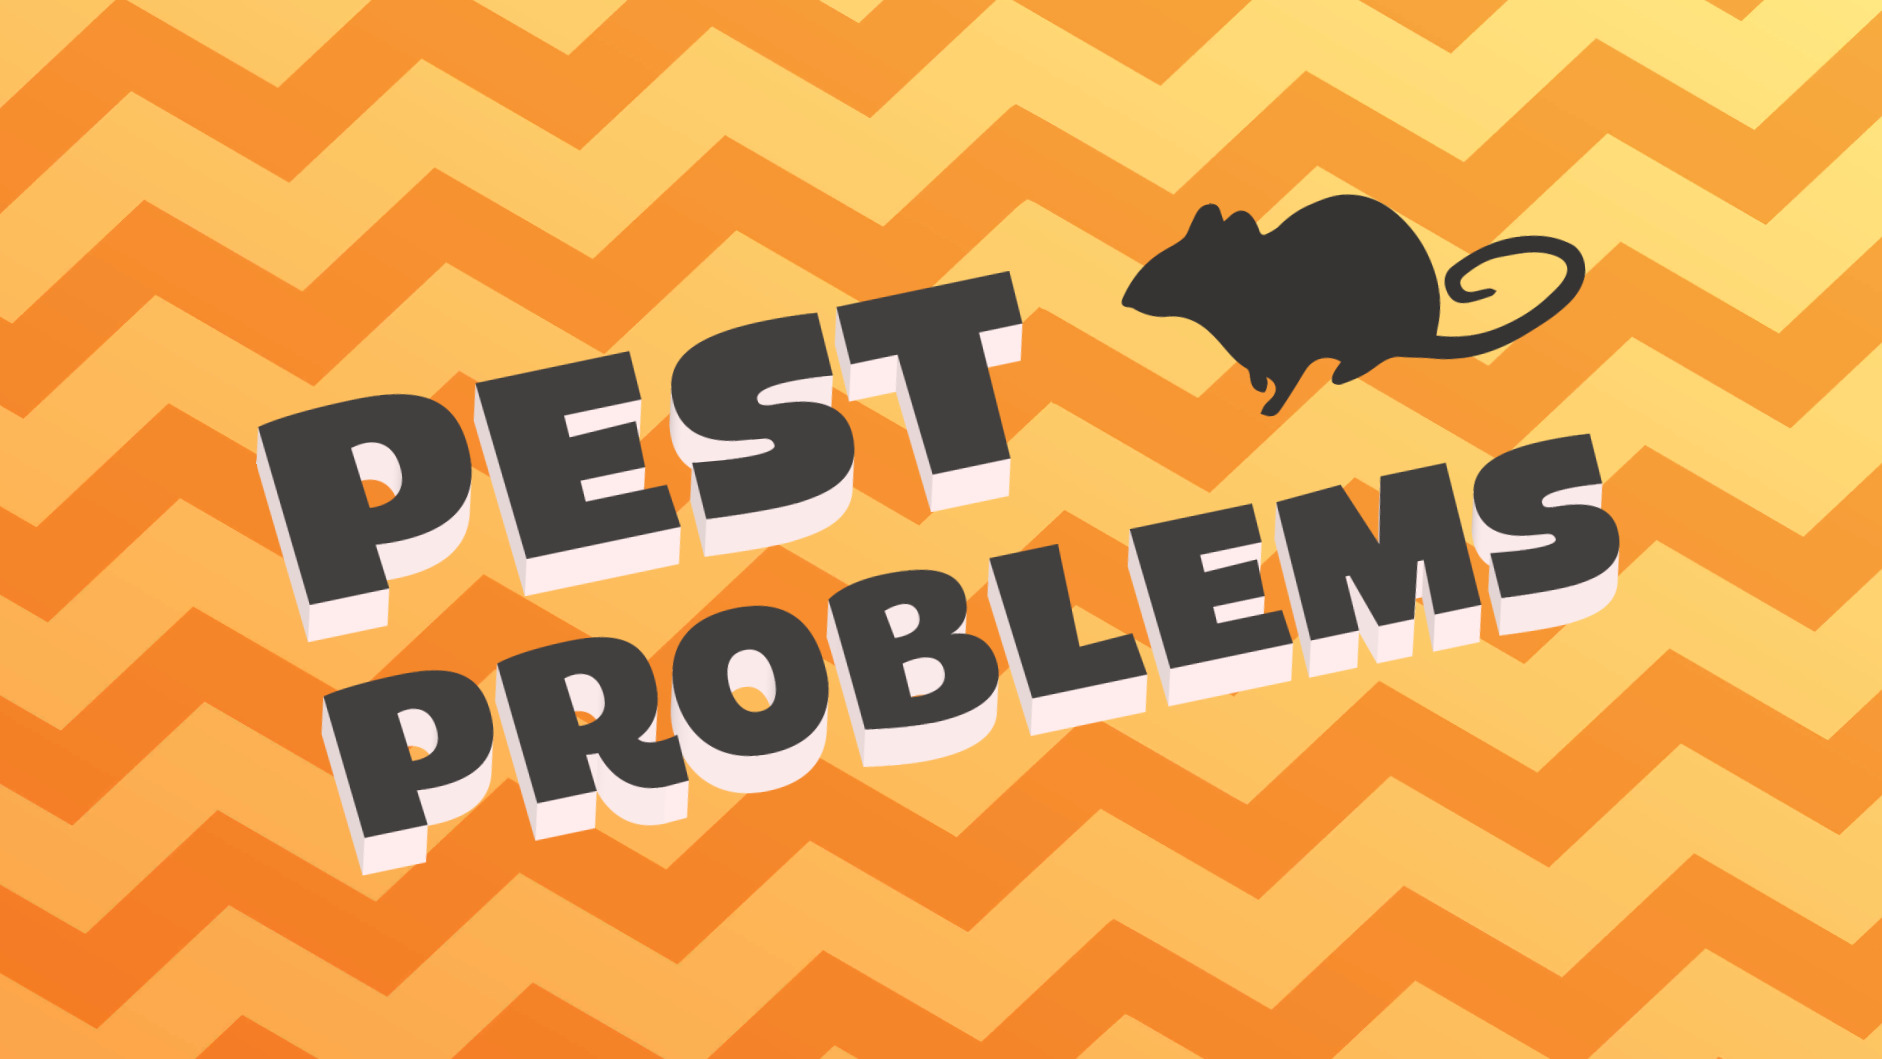 Our House- Pest Problems